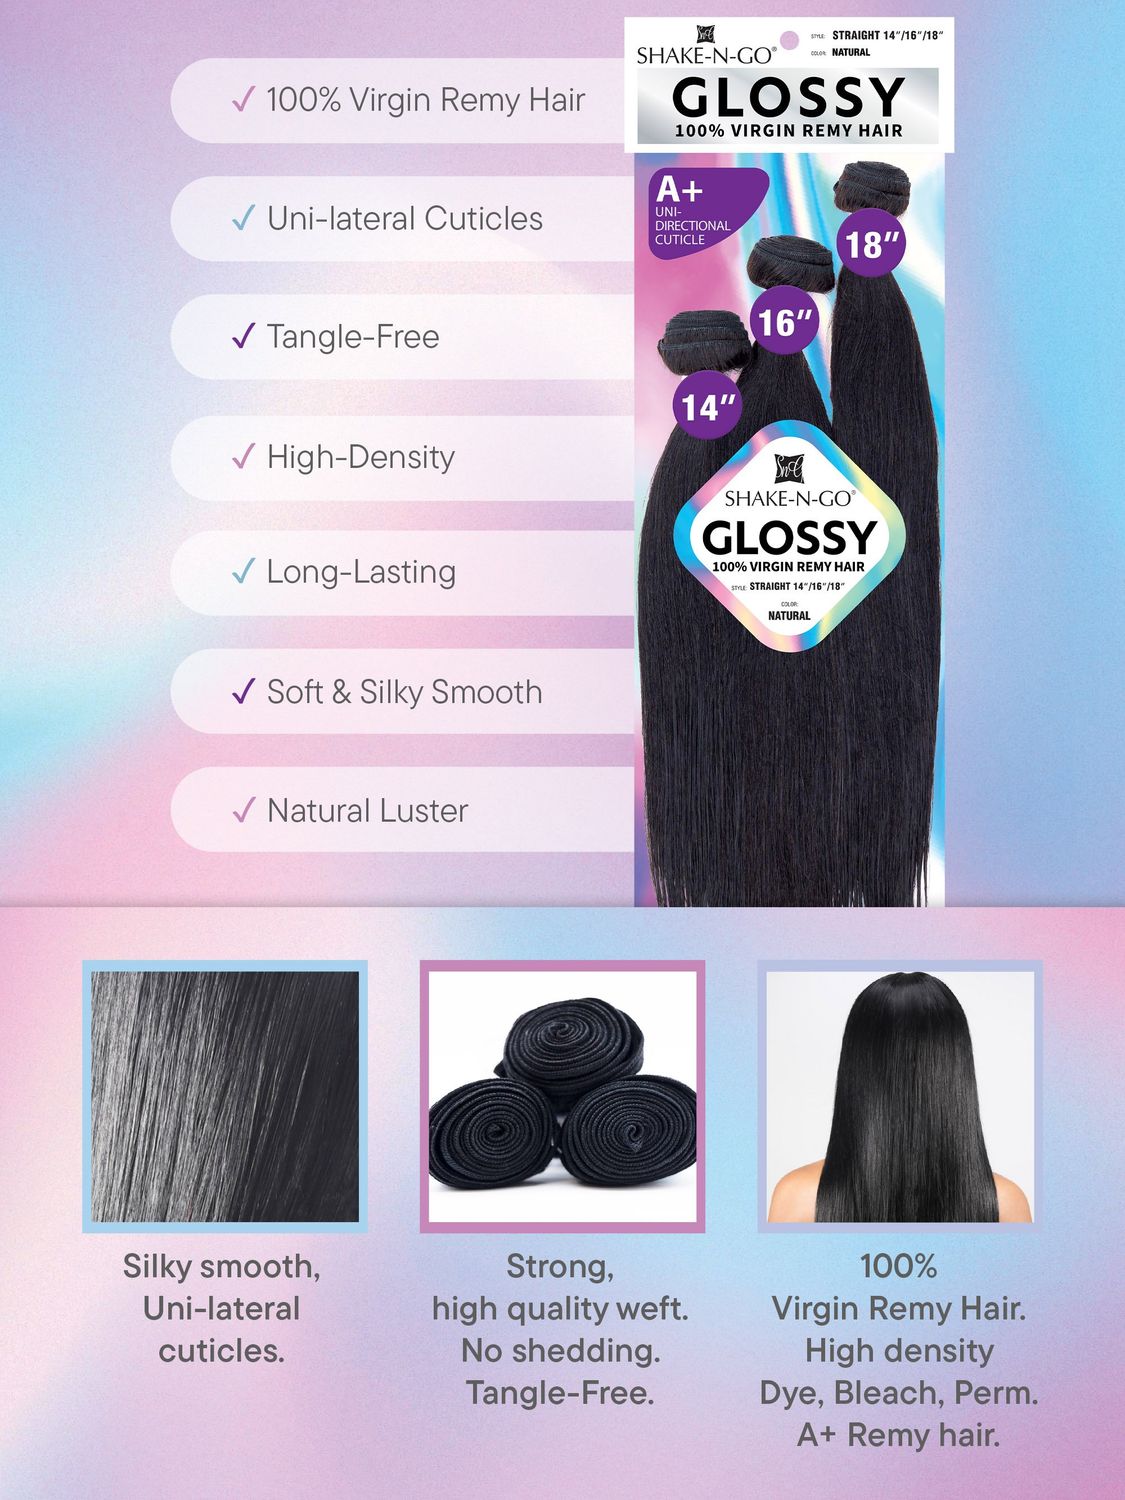 Glossy 100% Virgin Remy Hair, Color: Natural, Length: 18-22, Type: Deep Wave